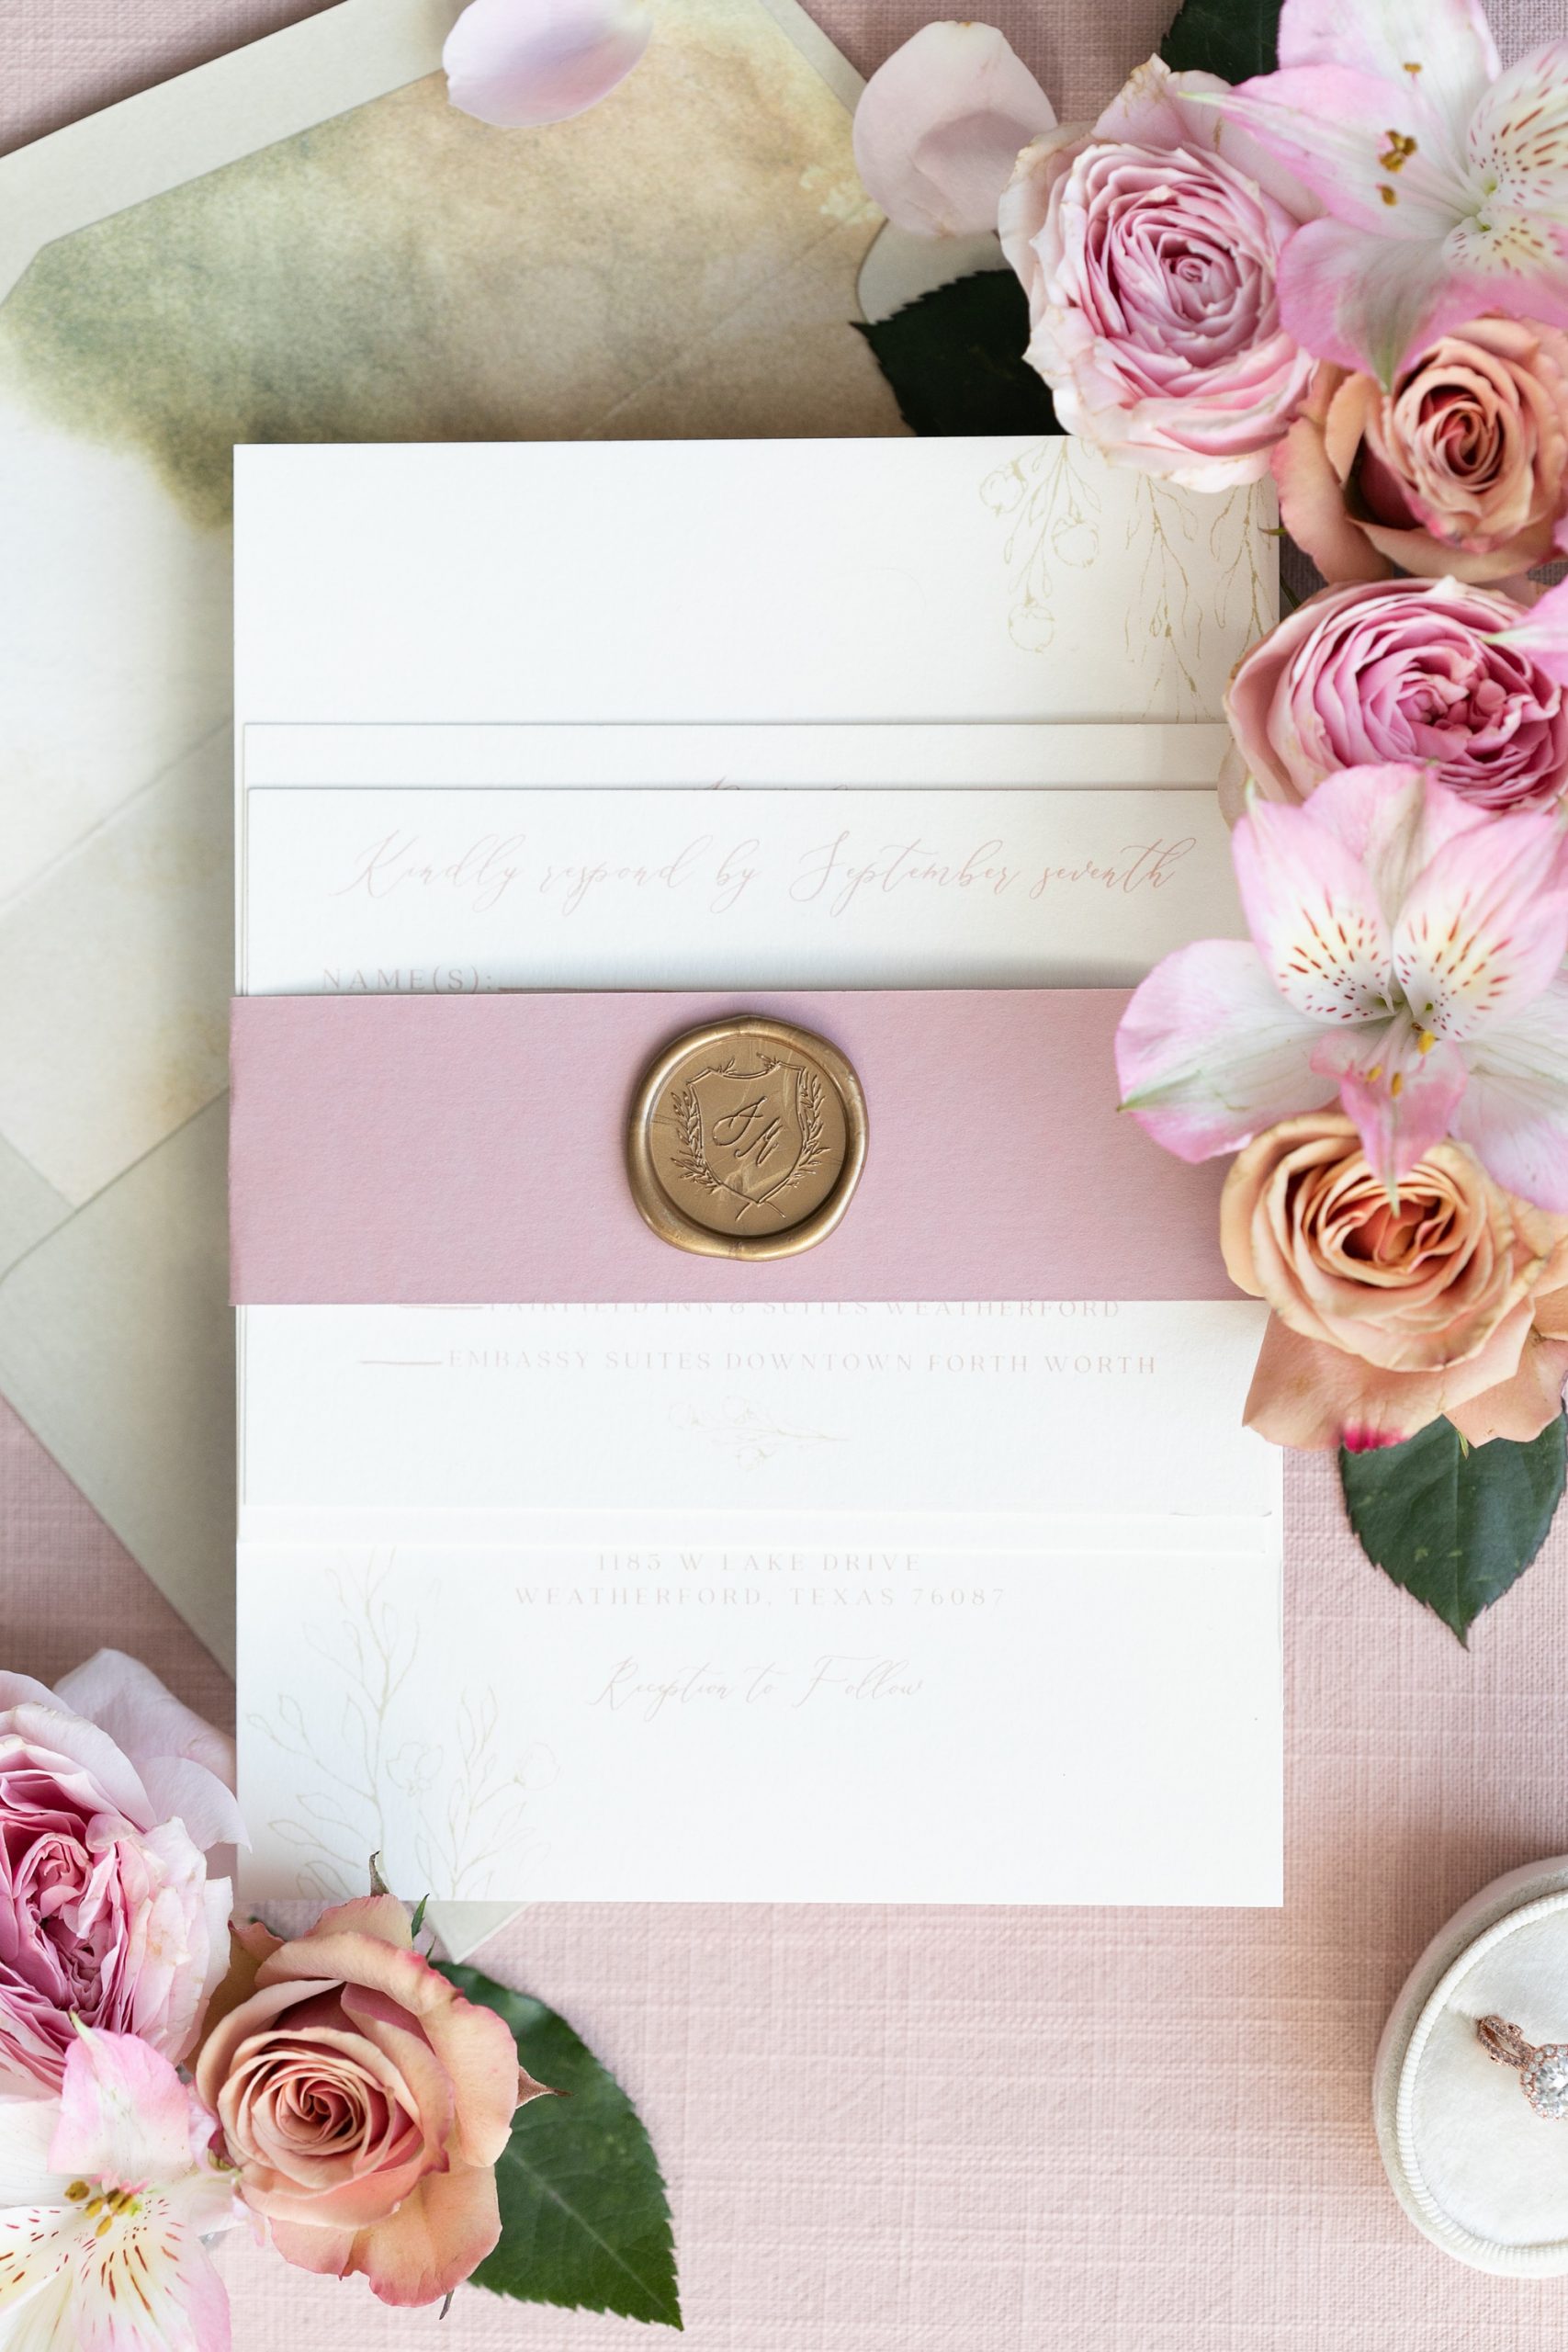 stationery with gold wax seal